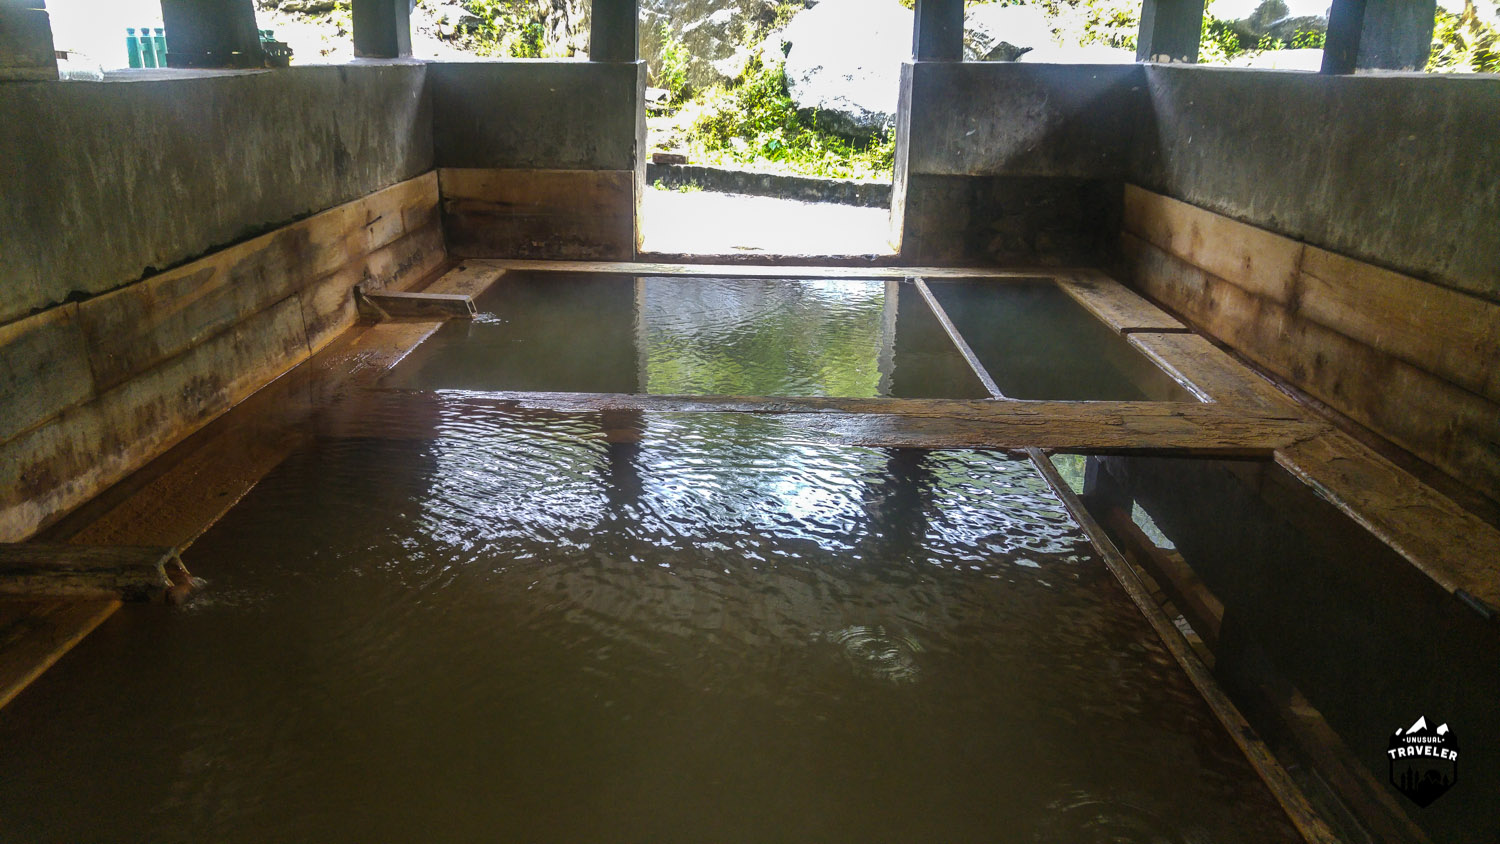 Two of the complexes hold two hot springs inside, the small section on the right is more sallow and made for kids.